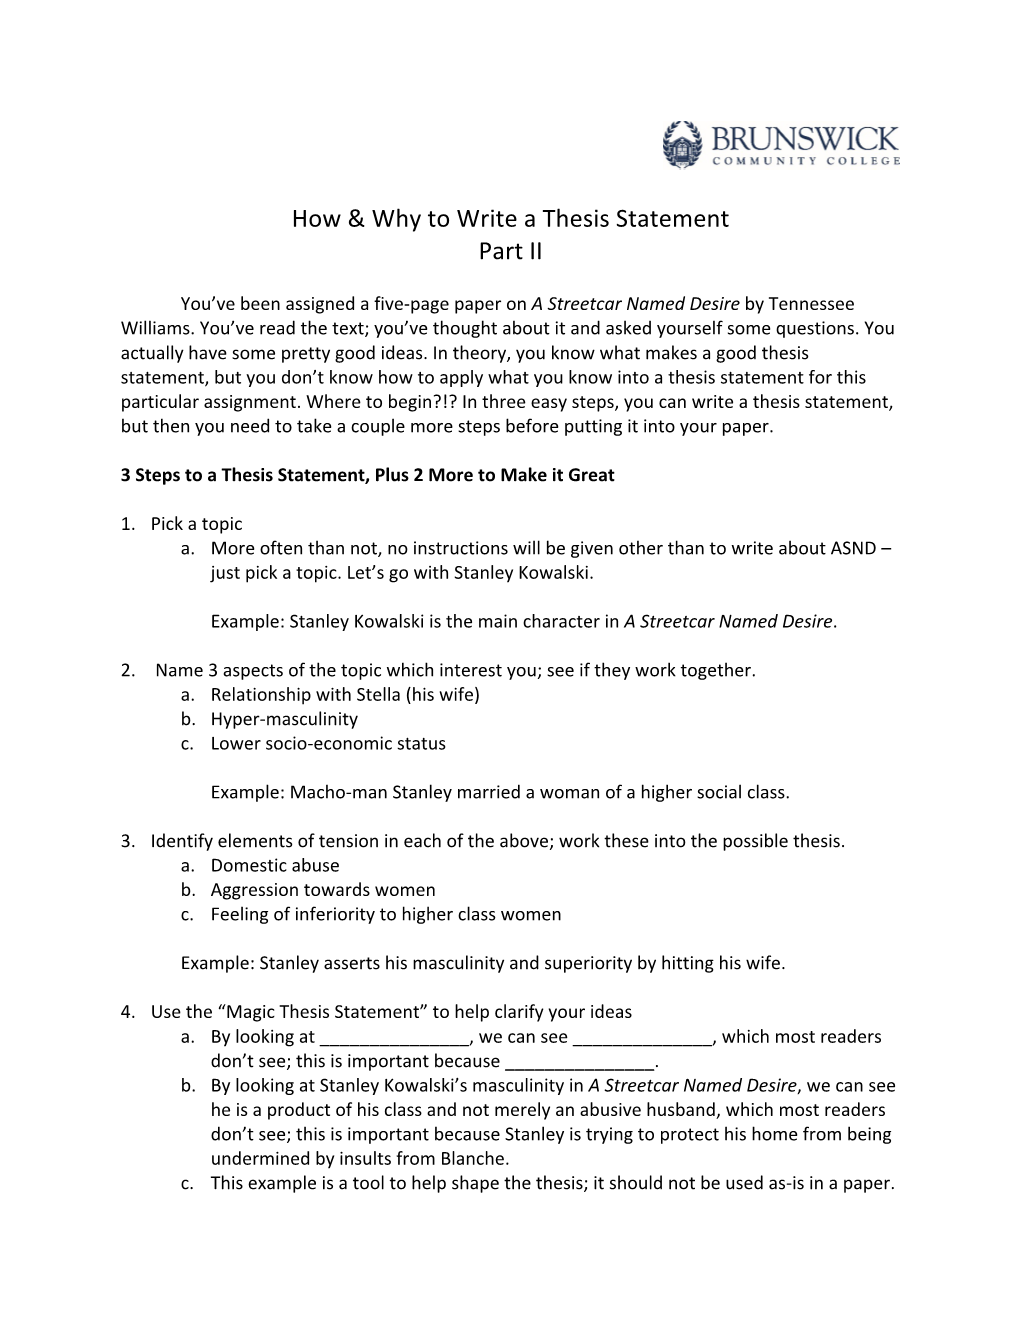 How & Why to Write a Thesis Statement Part II